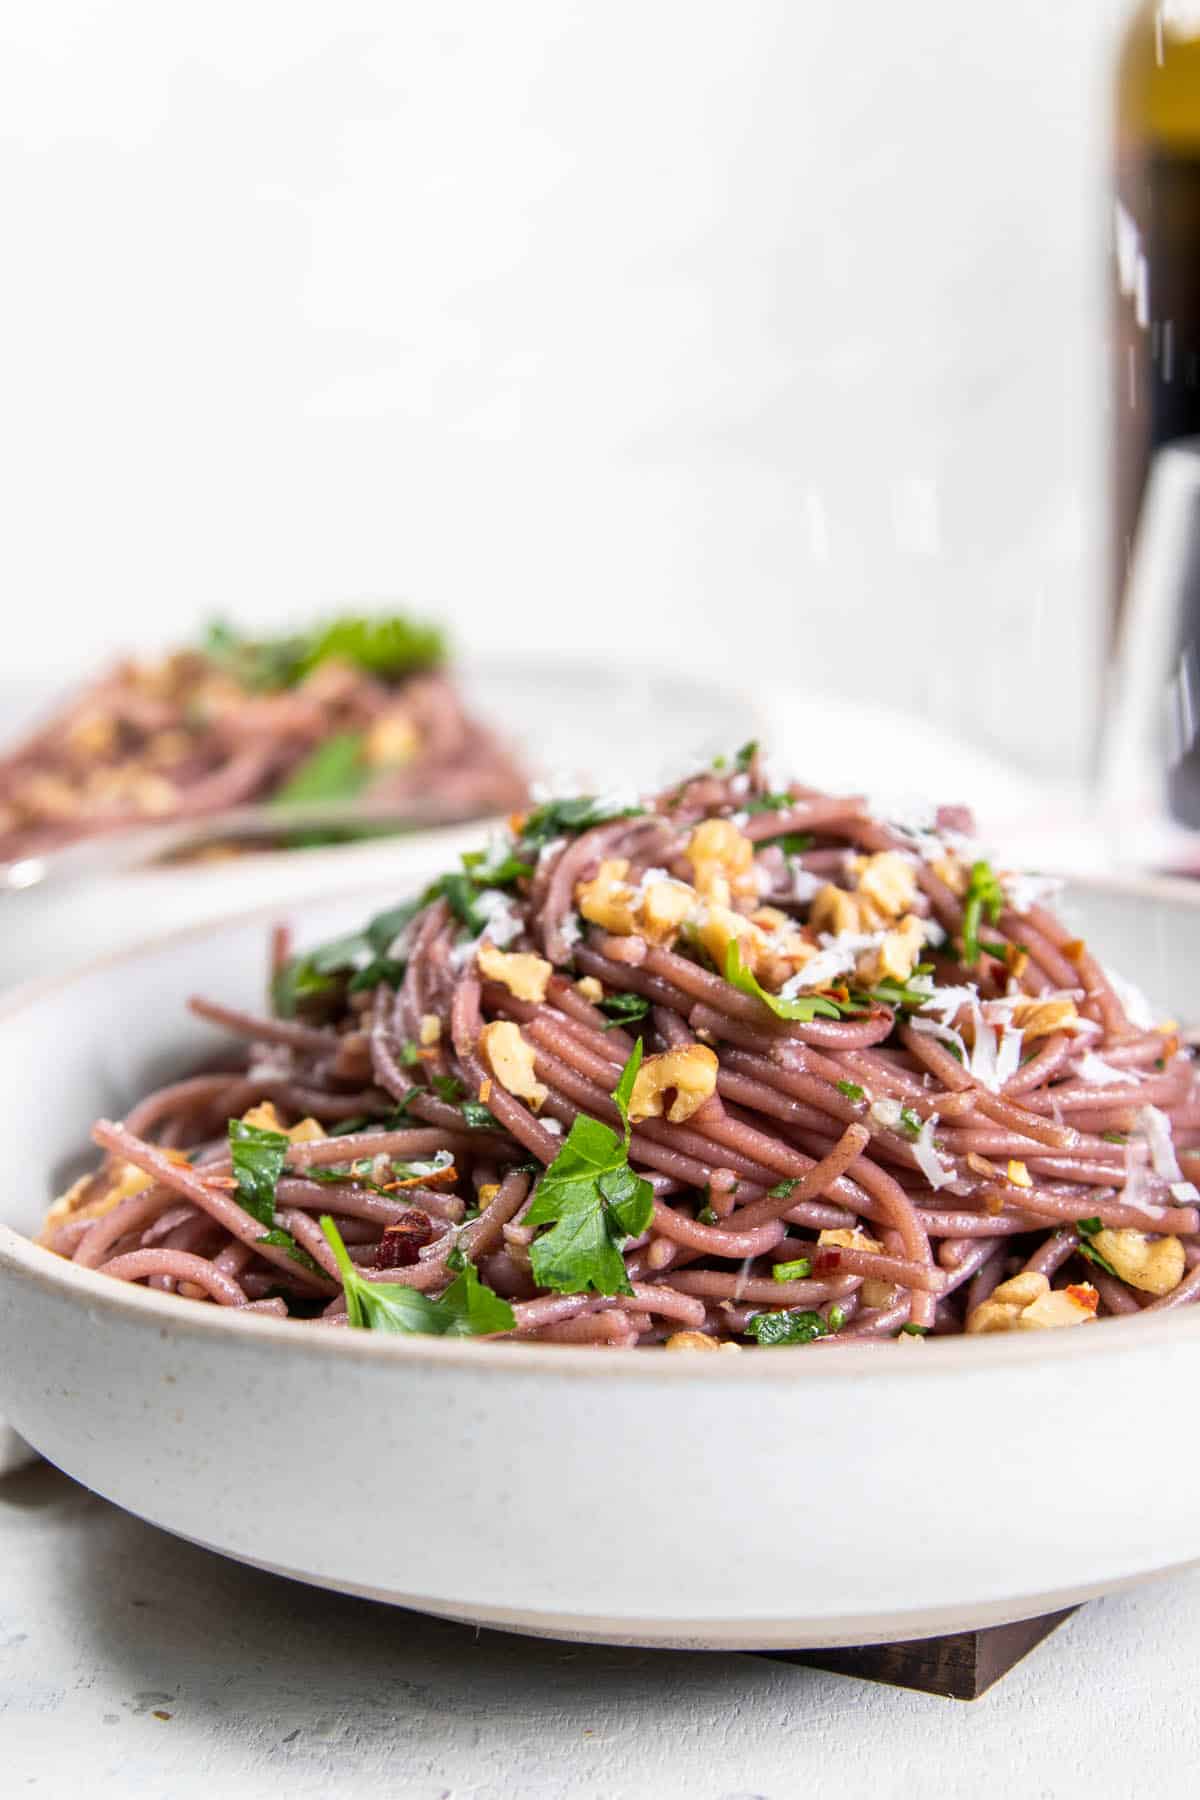 Red Wine Spaghetti topped with herbs, toasted walnuts, and cheese.